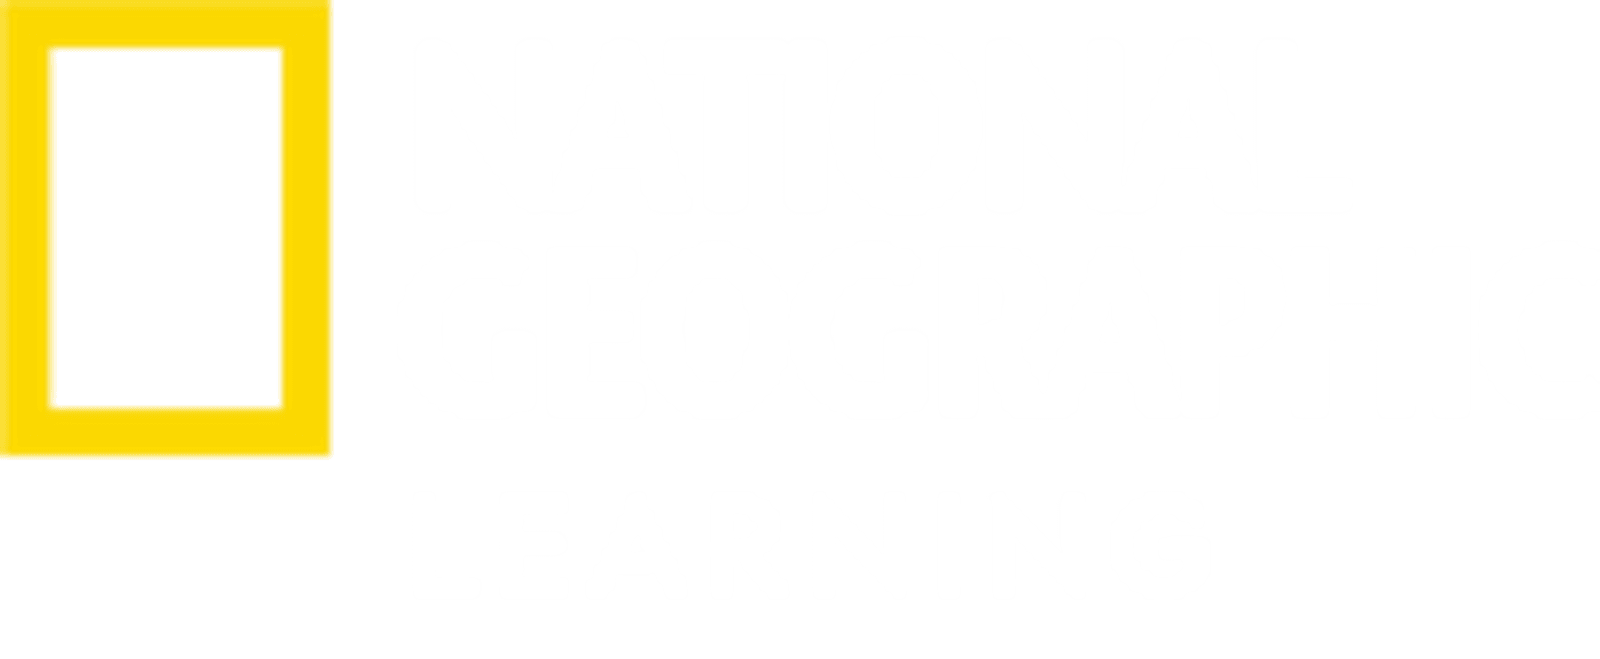 National Geographic Learning logo